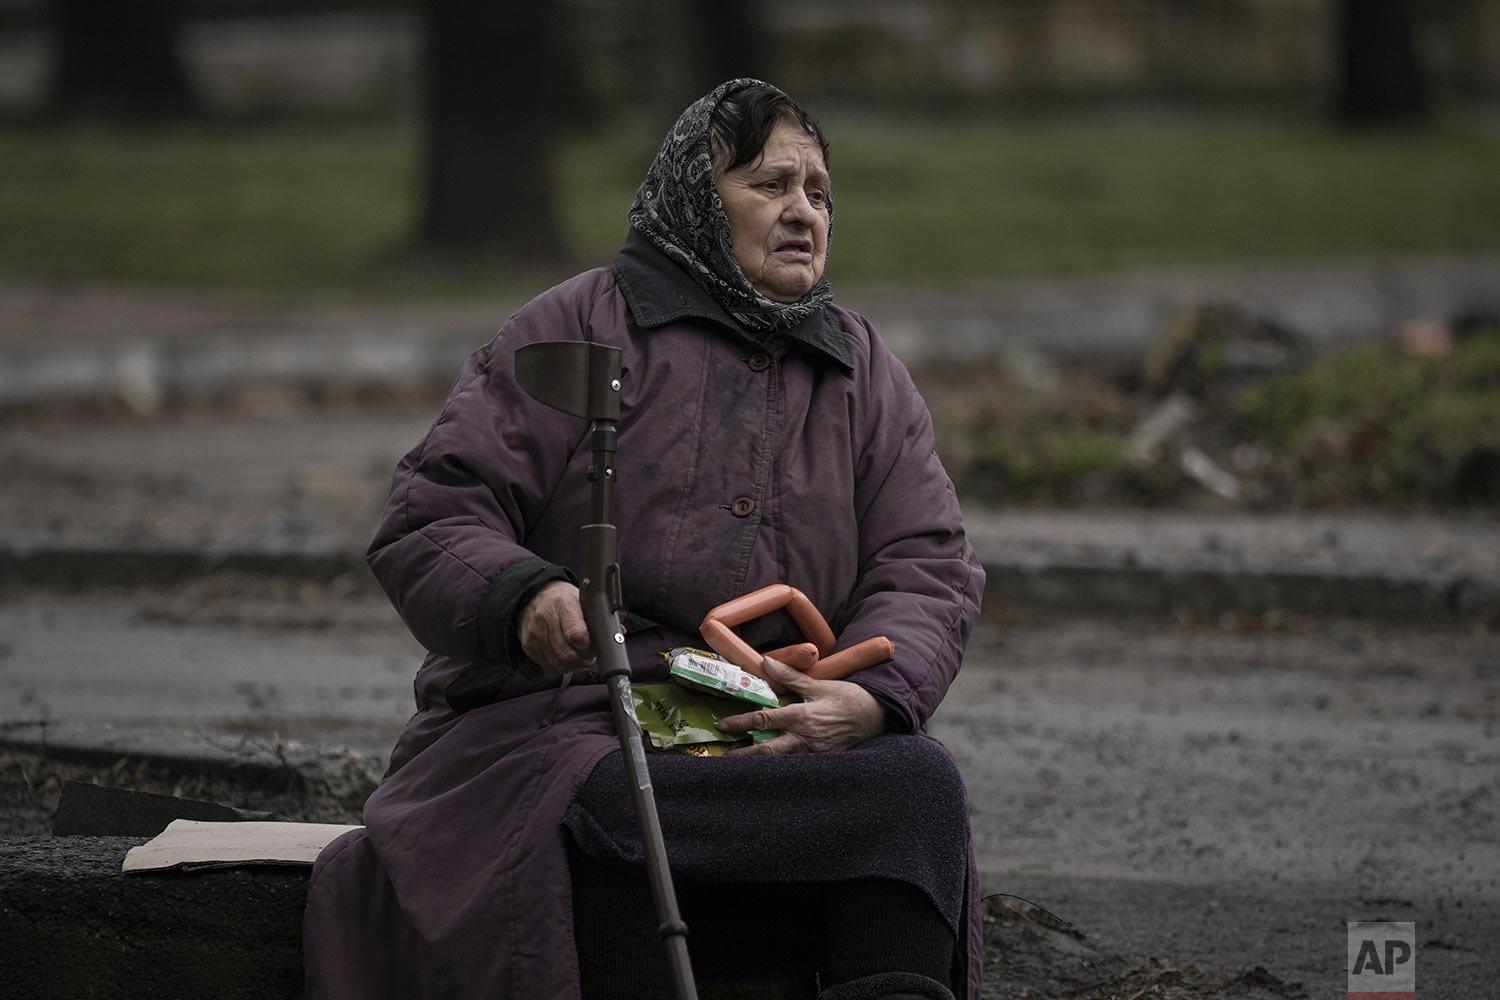  A woman holds food items she received after a convoy of military and aid vehicles arrived in the formerly Russian-occupied Kyiv suburb of Bucha, Ukraine, Saturday, April 2, 2022. (AP Photo/Vadim Ghirda) 